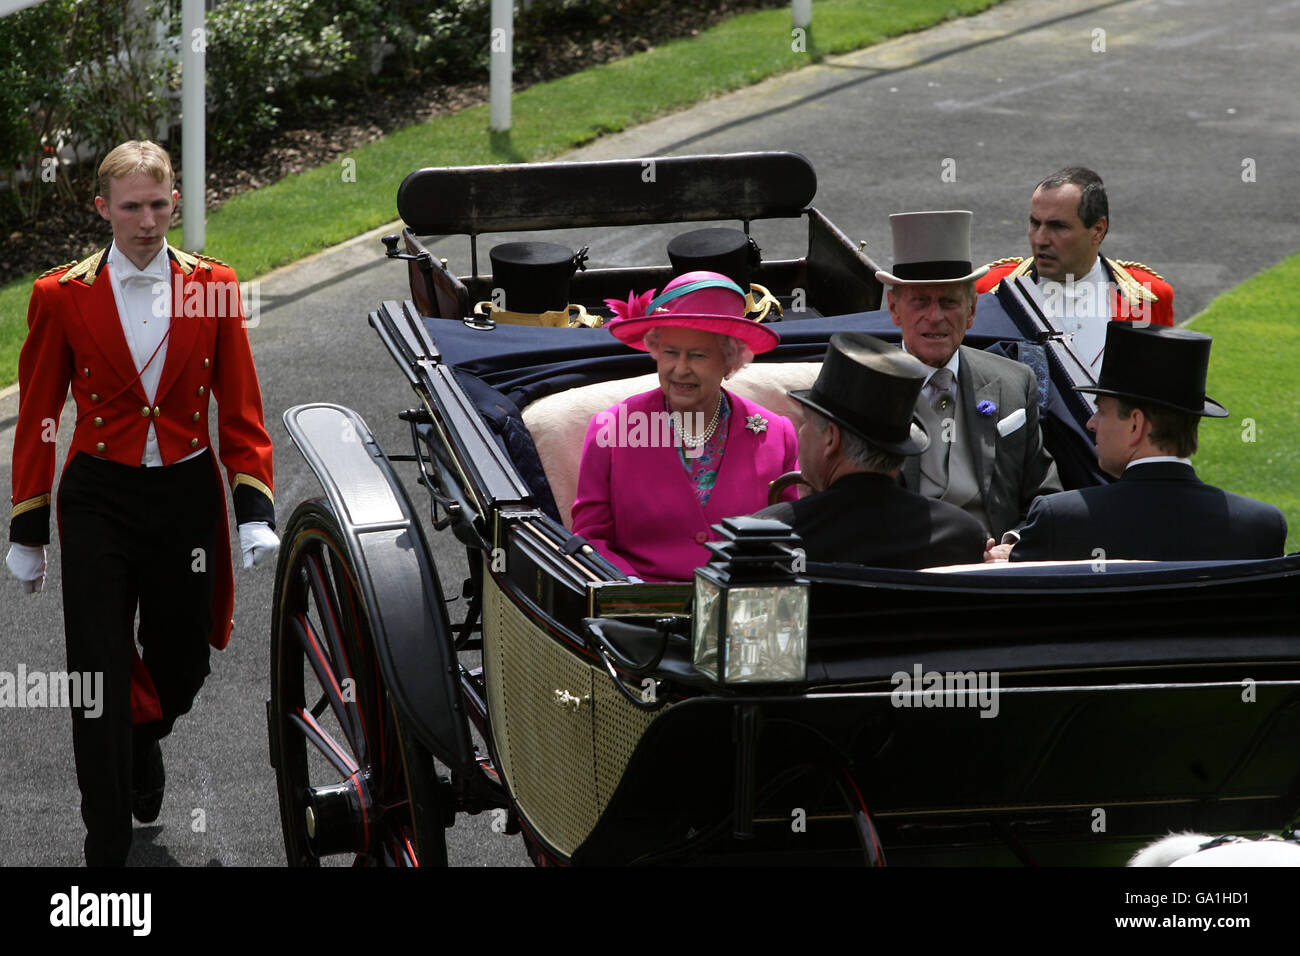 Queen Elizabeth ll and Prince Philip, Duke of Edinburgh arrive in an open carriage for the first day of Royal Ascot. Stock Photo